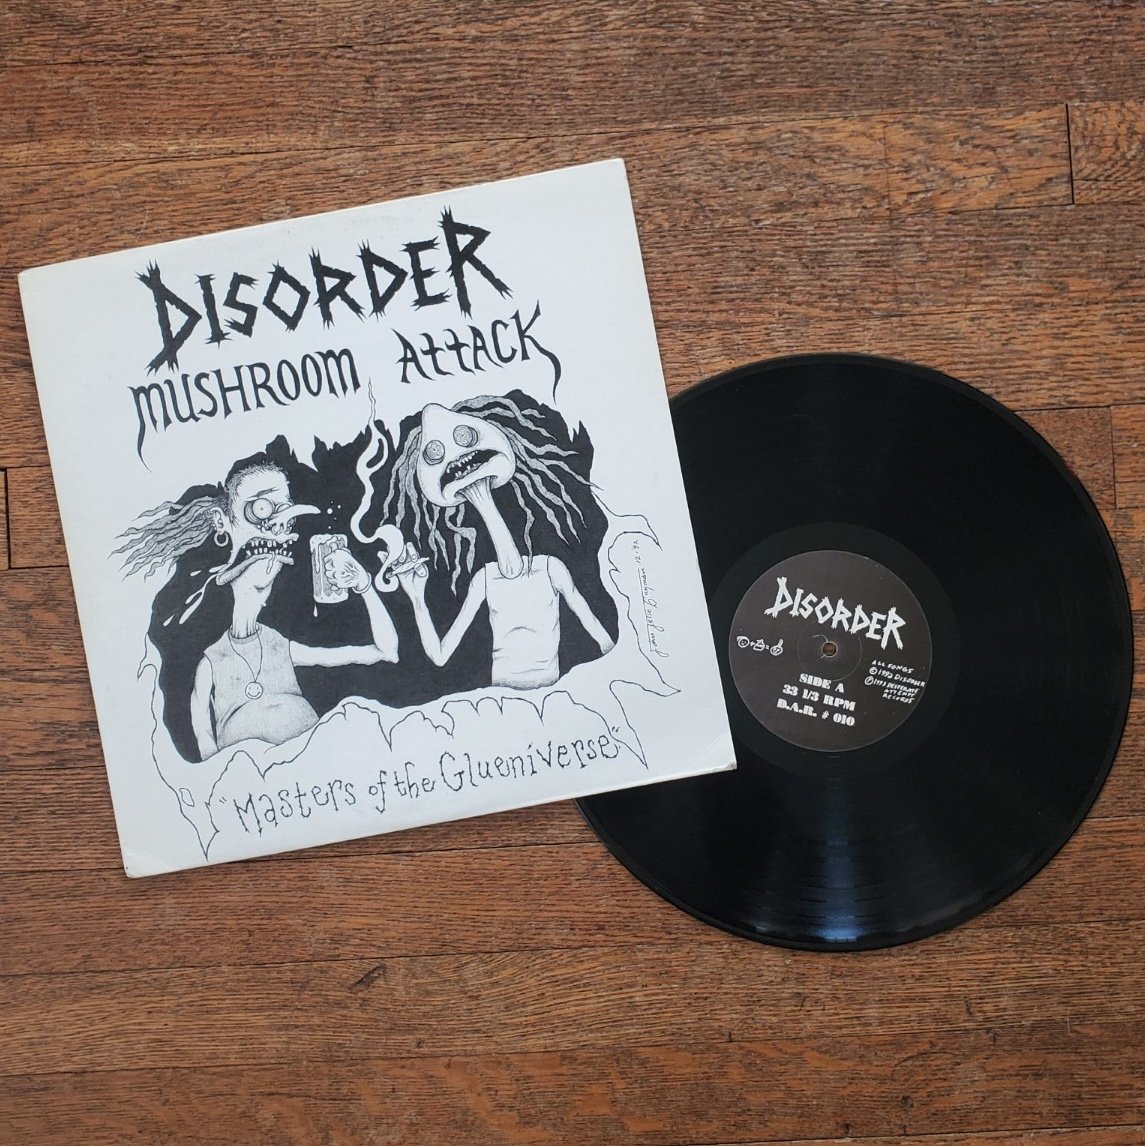 Disorder - Mushroom Attack - Masters Of The Glueniverse LP - cover front with vinyl.jpeg